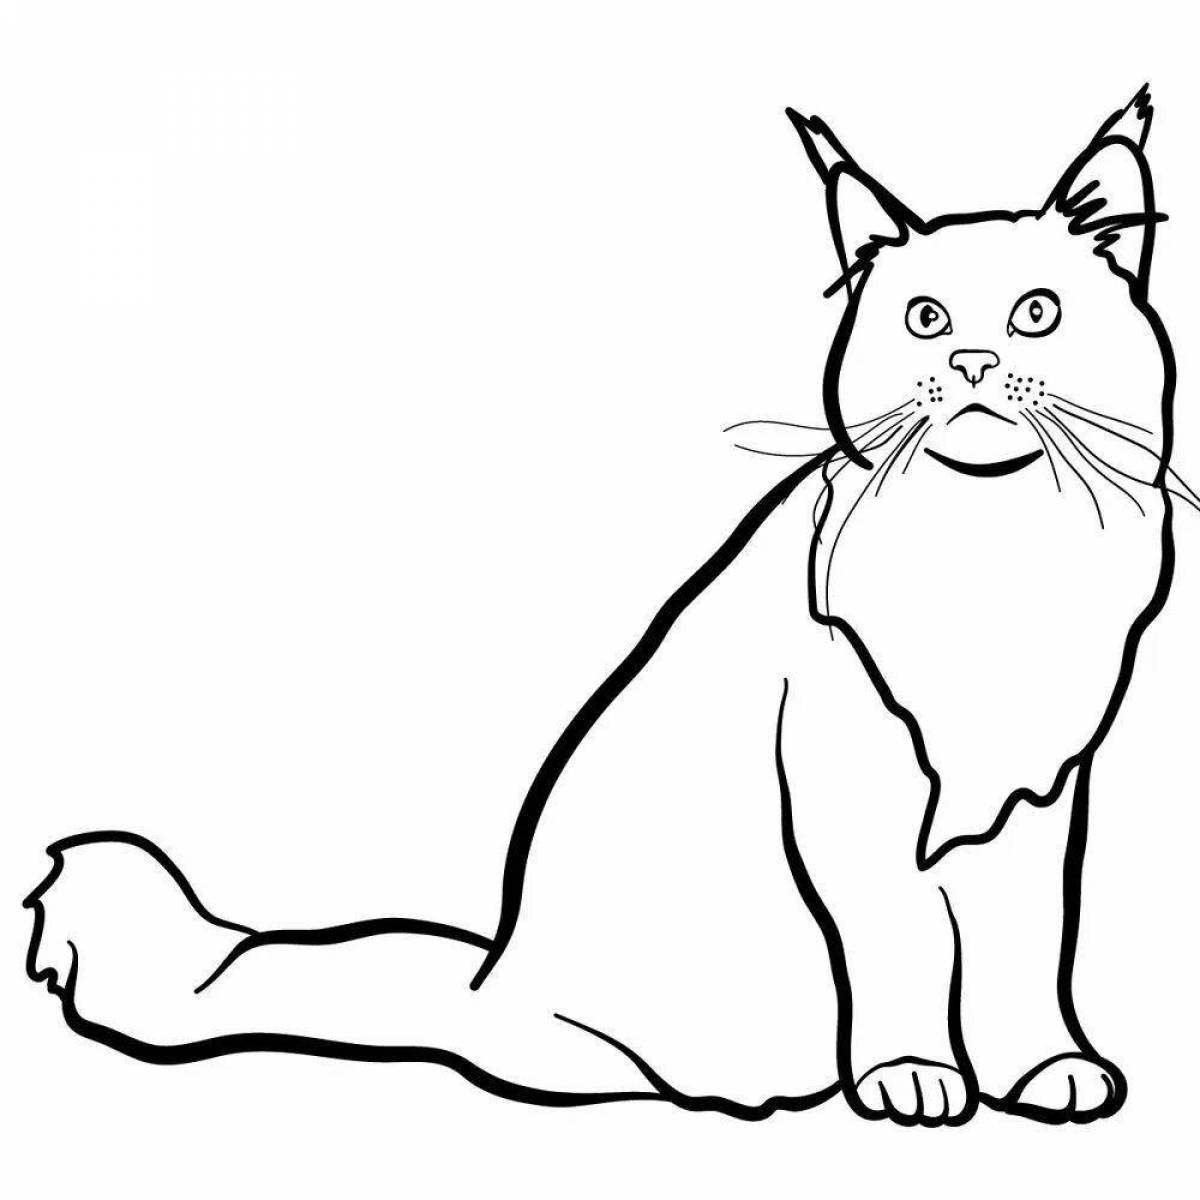 Soft siberian cat coloring page